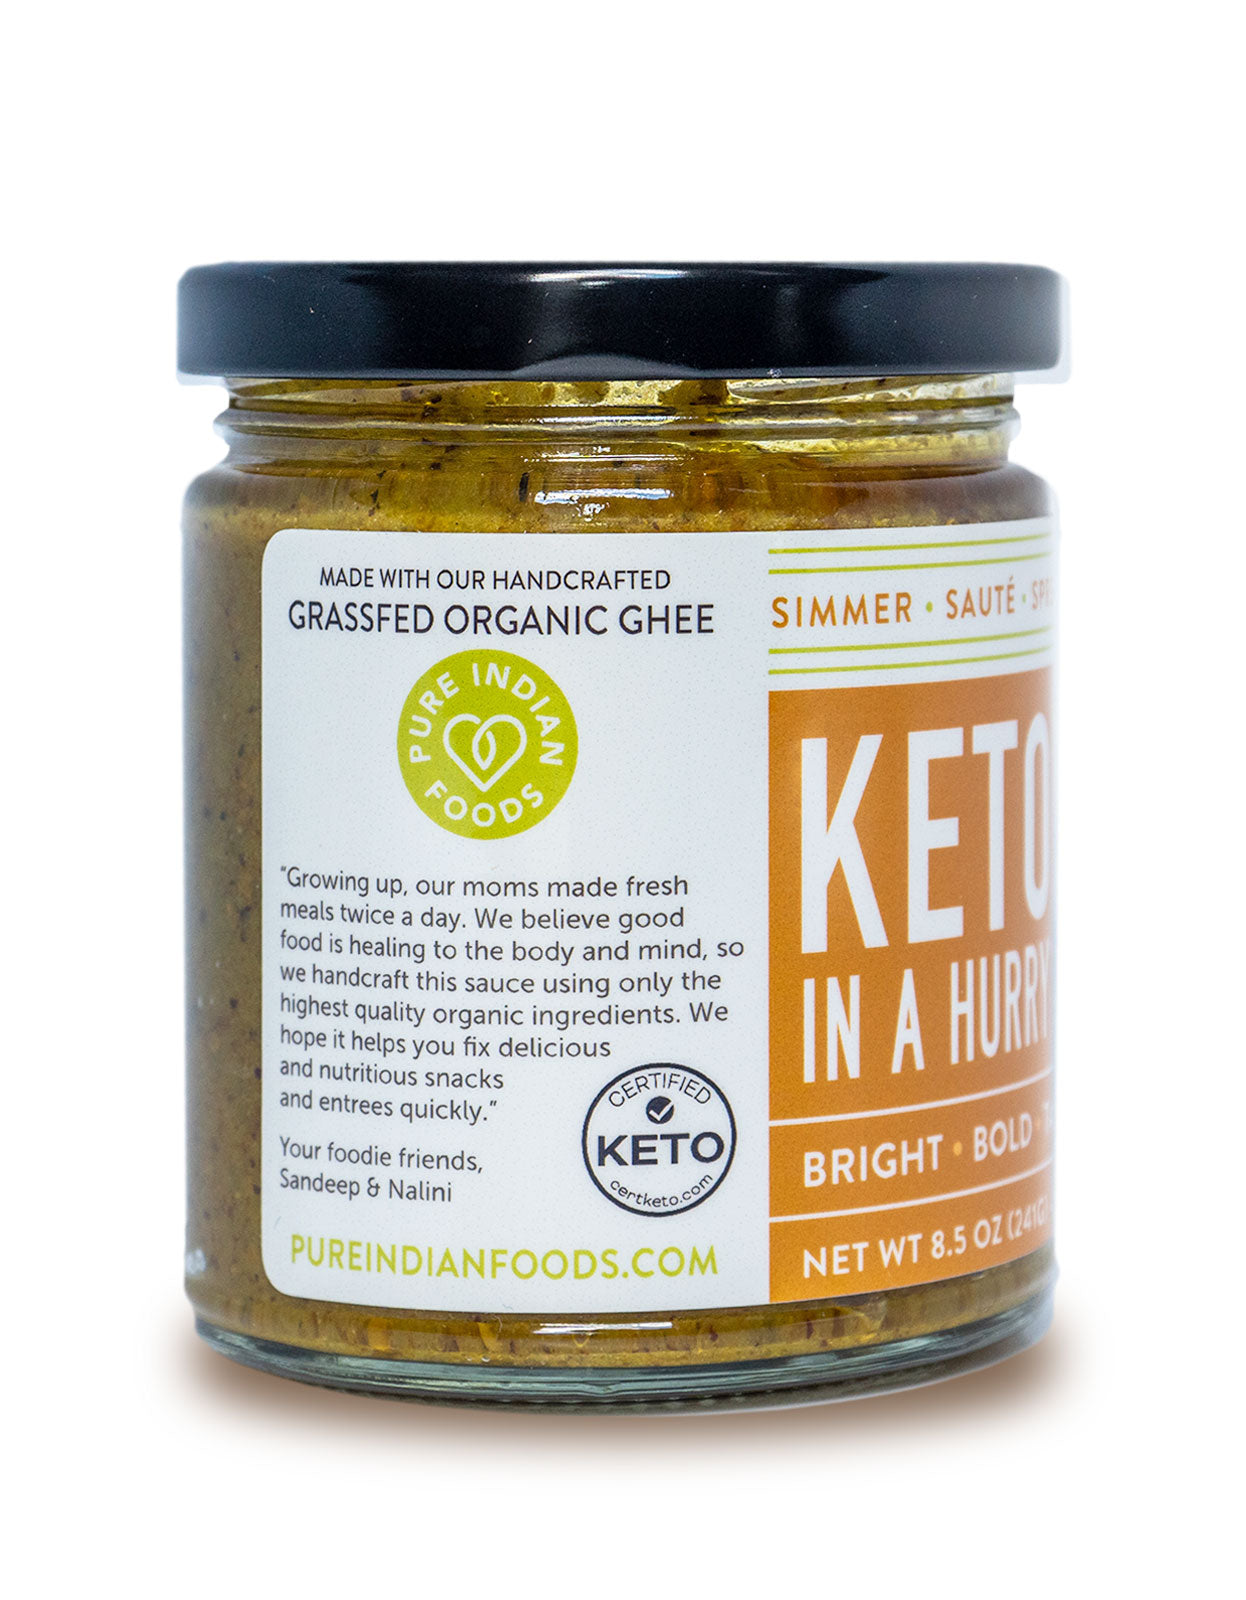 Side label of a jar of Pure Indian Foods Keto In A Hurry organic keto curry sauce